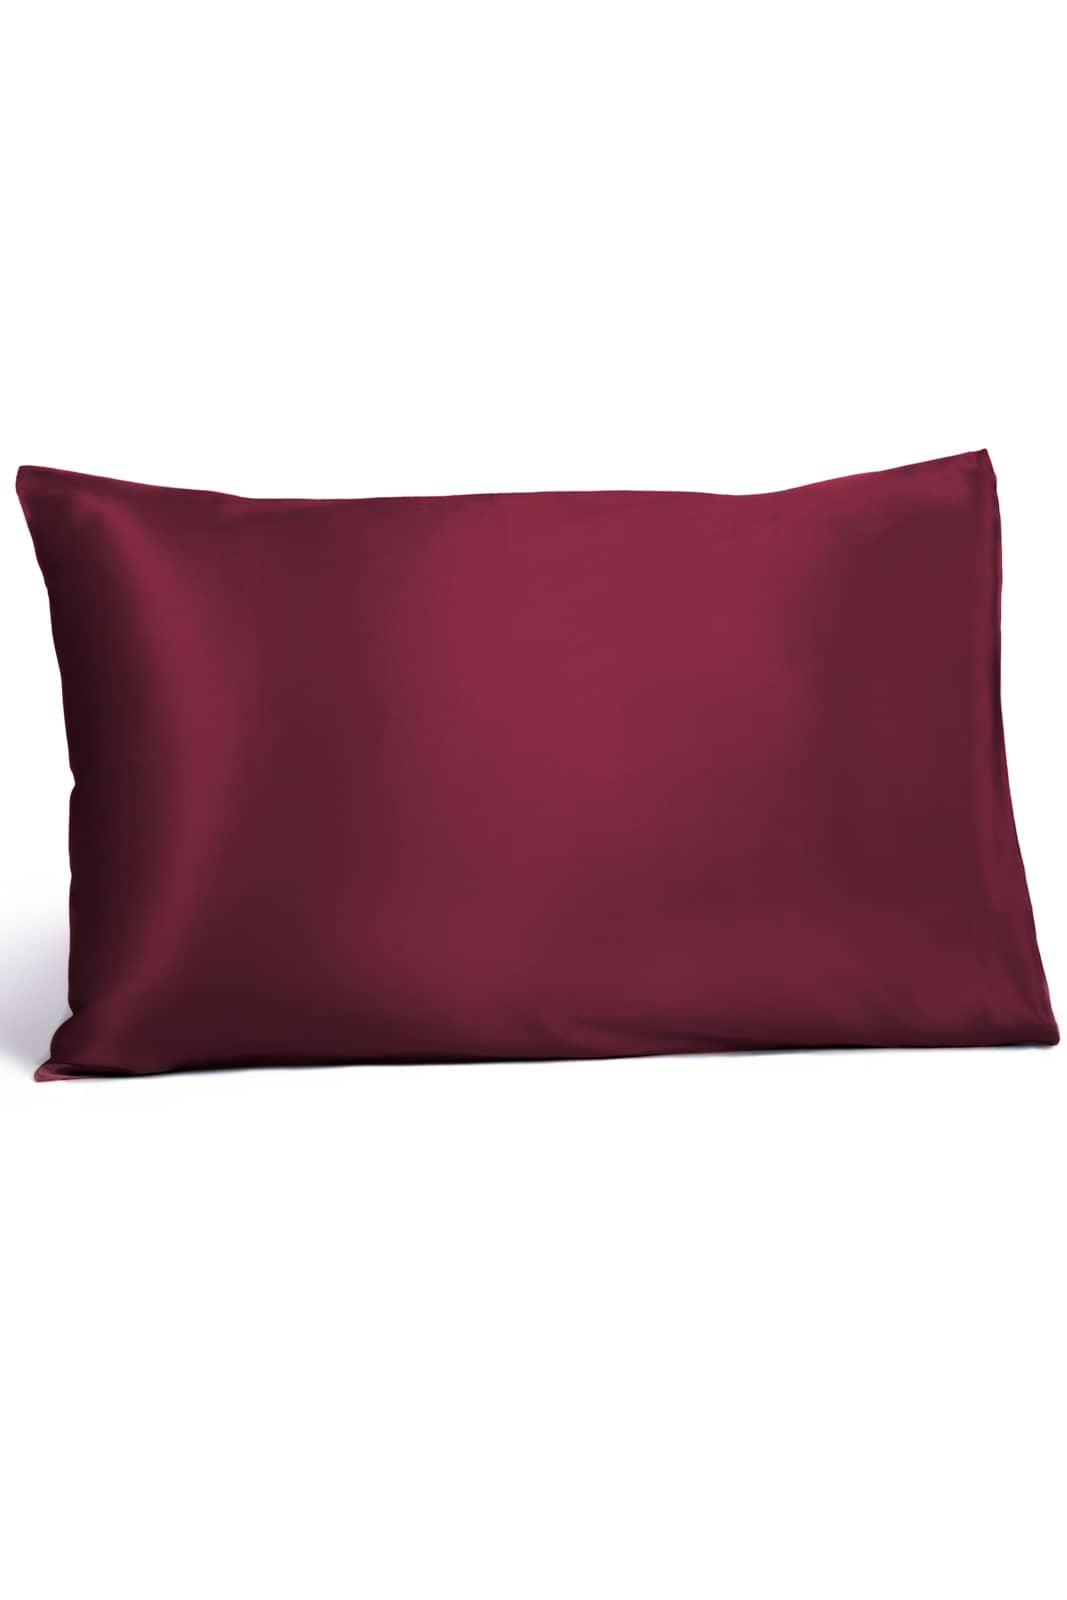 Fishers Finery 19 Momme 100% Pure Mulberry Silk Pillowcase